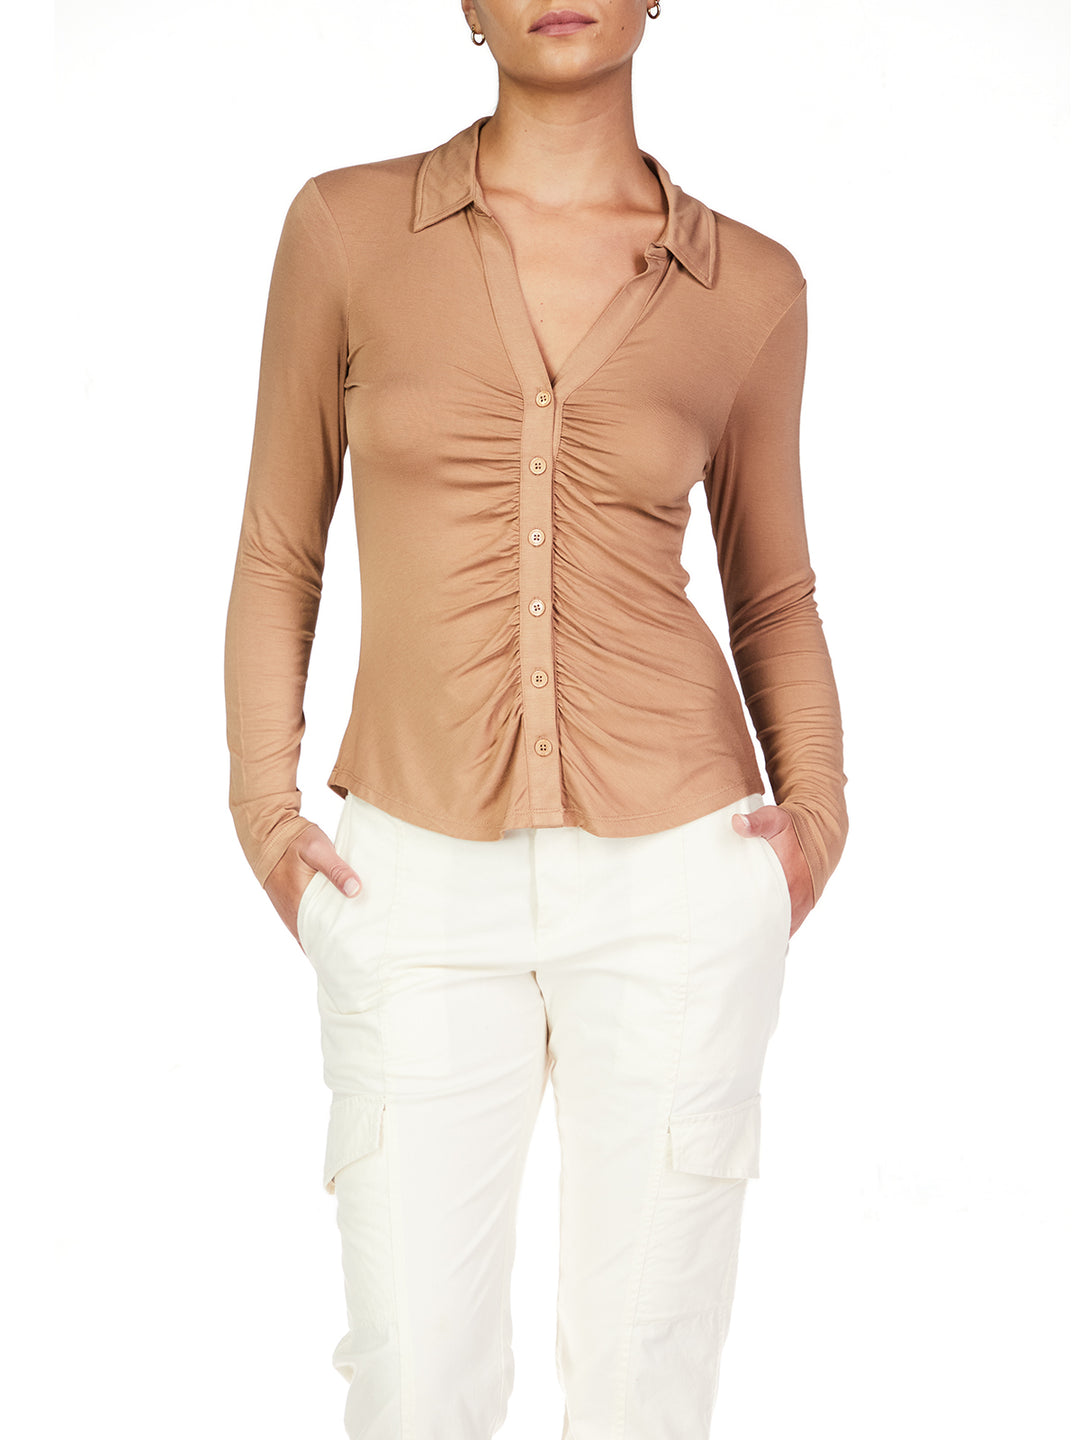 DREAMGIRL BUTTON UP-MOCHA MOUSSE - Kingfisher Road - Online Boutique